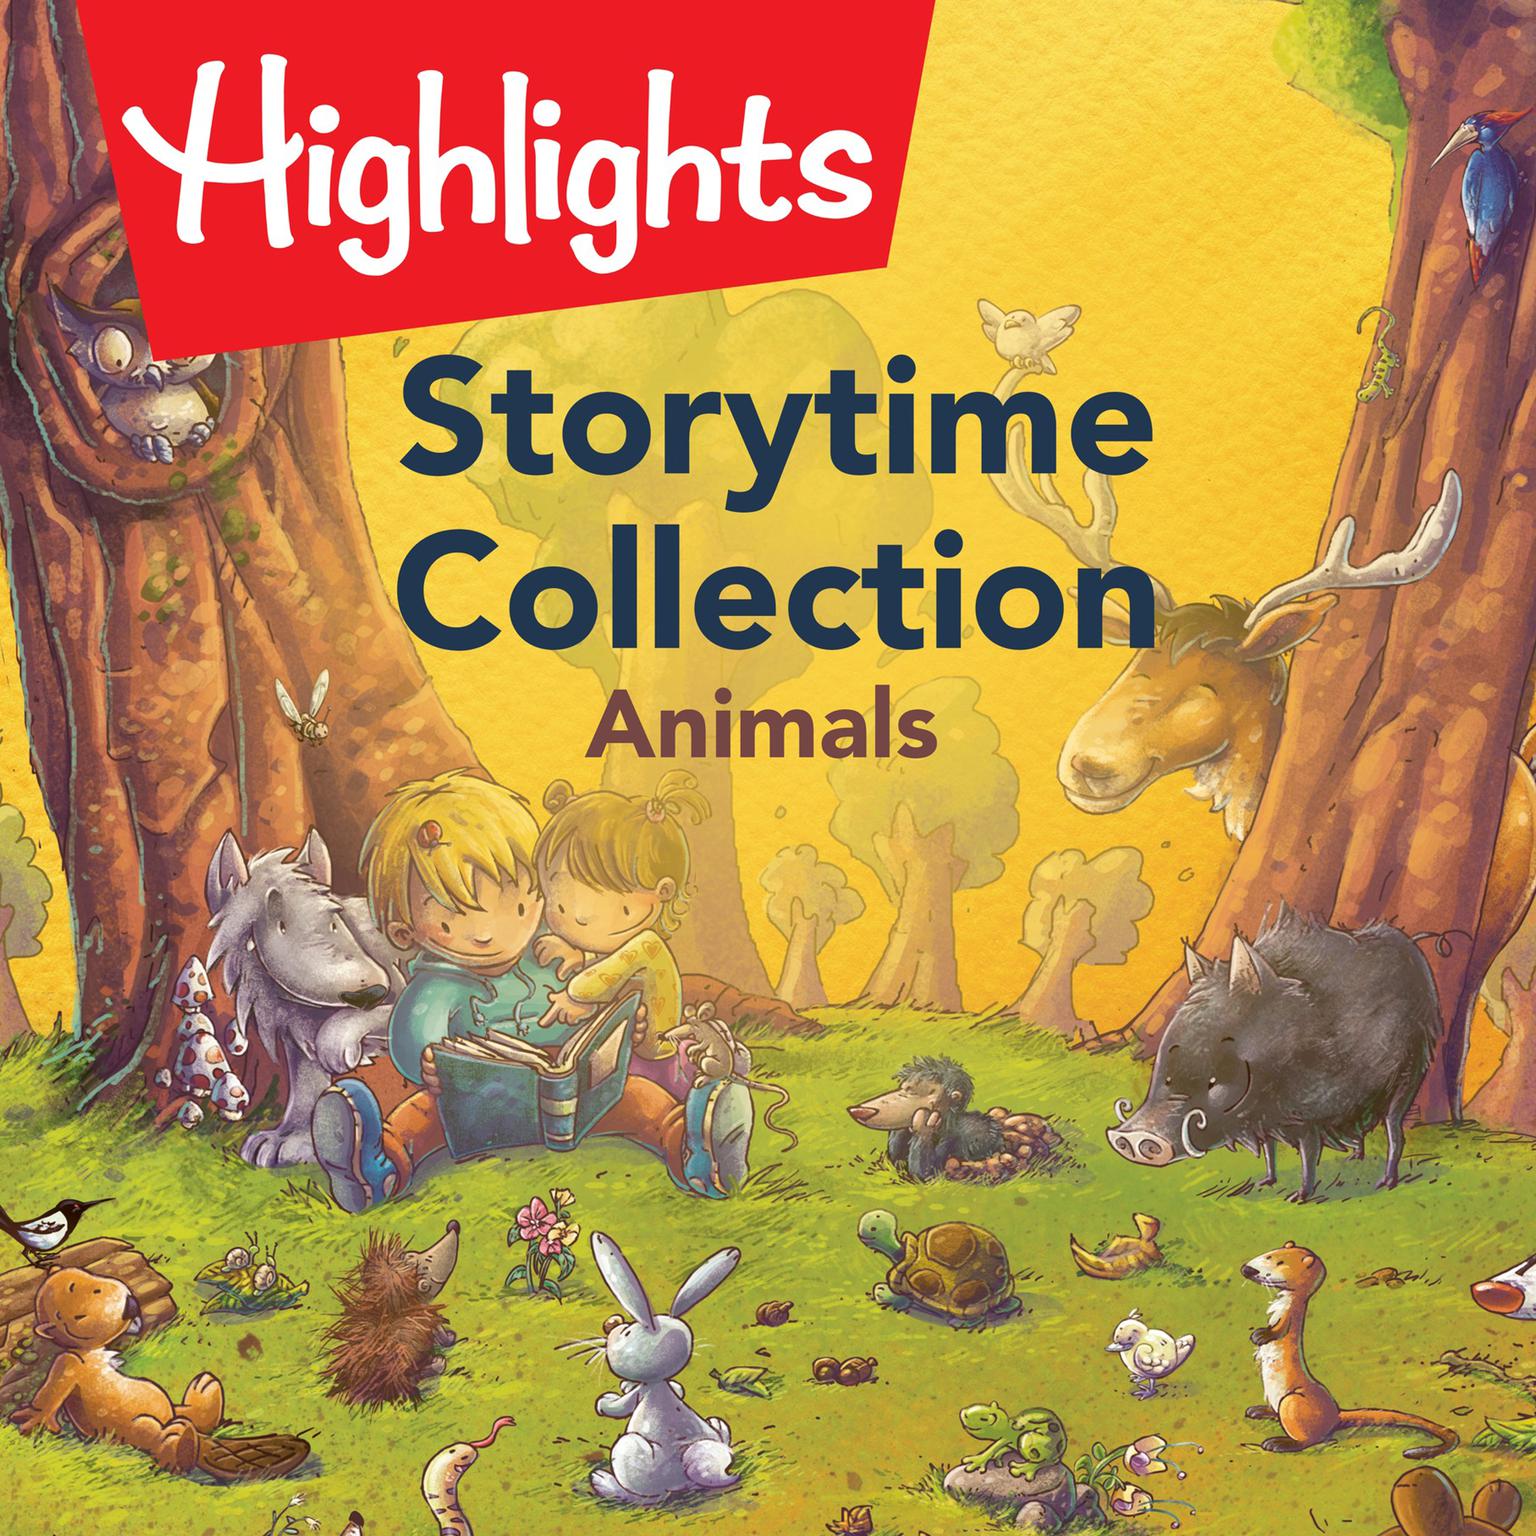 Storytime Collection: Animals Audiobook, by Highlights for Children